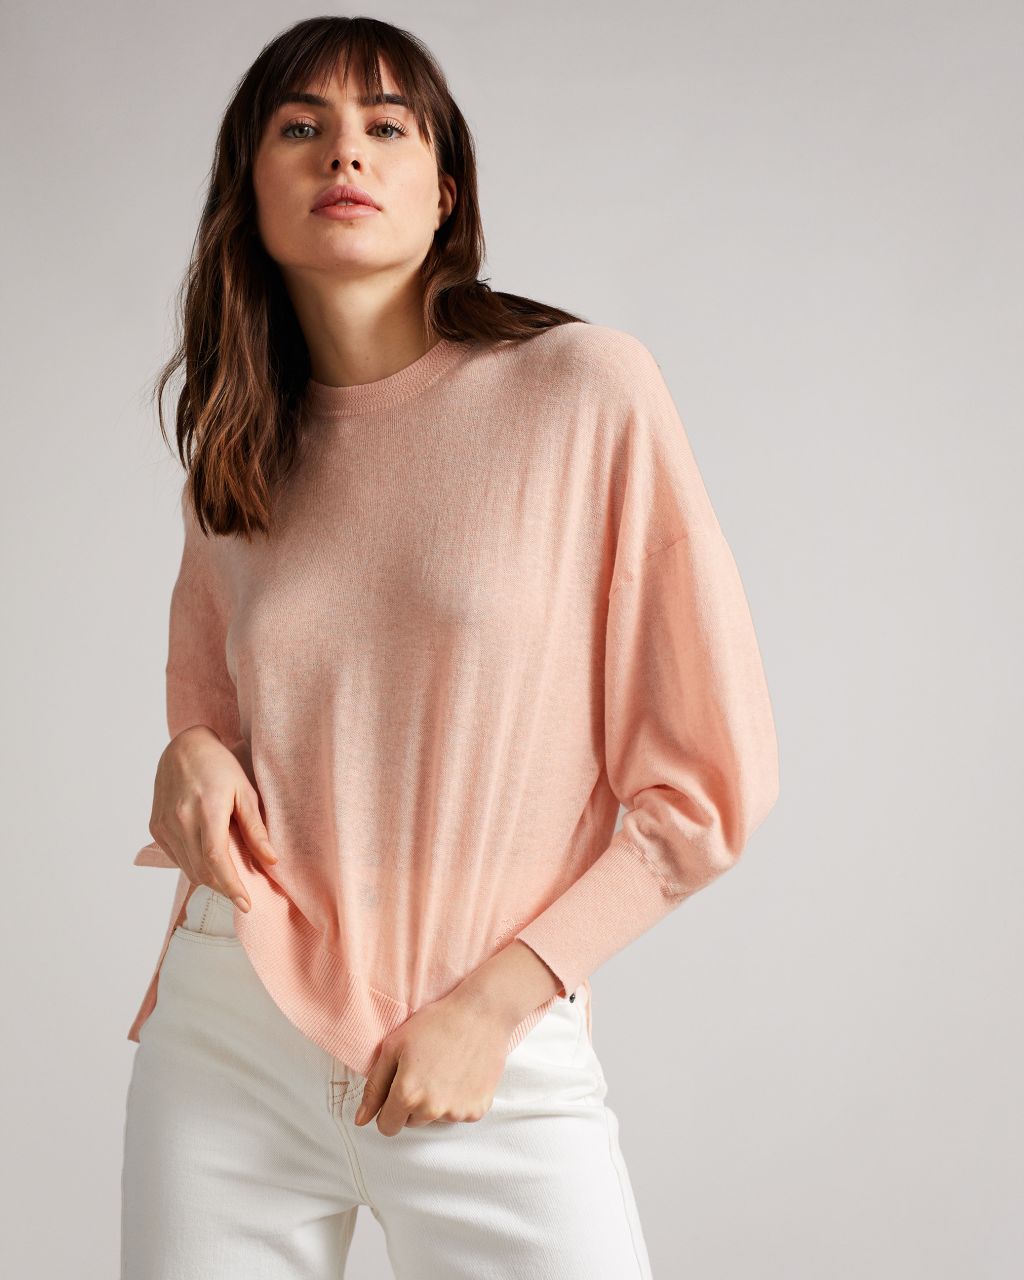 Ted Baker Women's Sleeve Detailed Jumper in Pink, Nicci